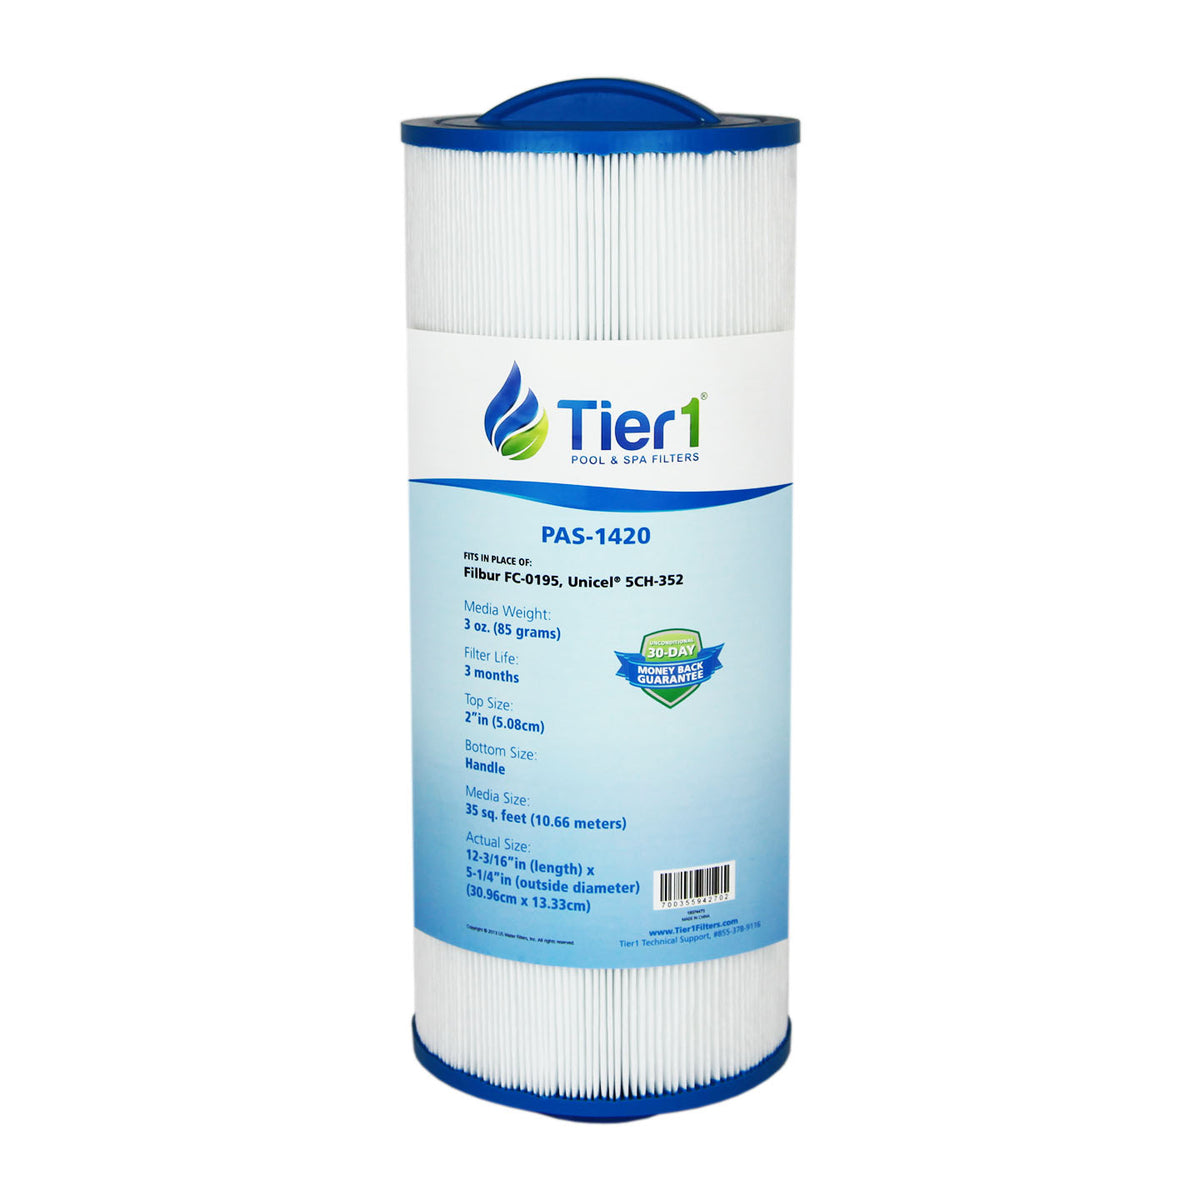 Tier1 Brand Replacement Pool and Spa Filter for 20042, 370-0242 &amp; 370-0243